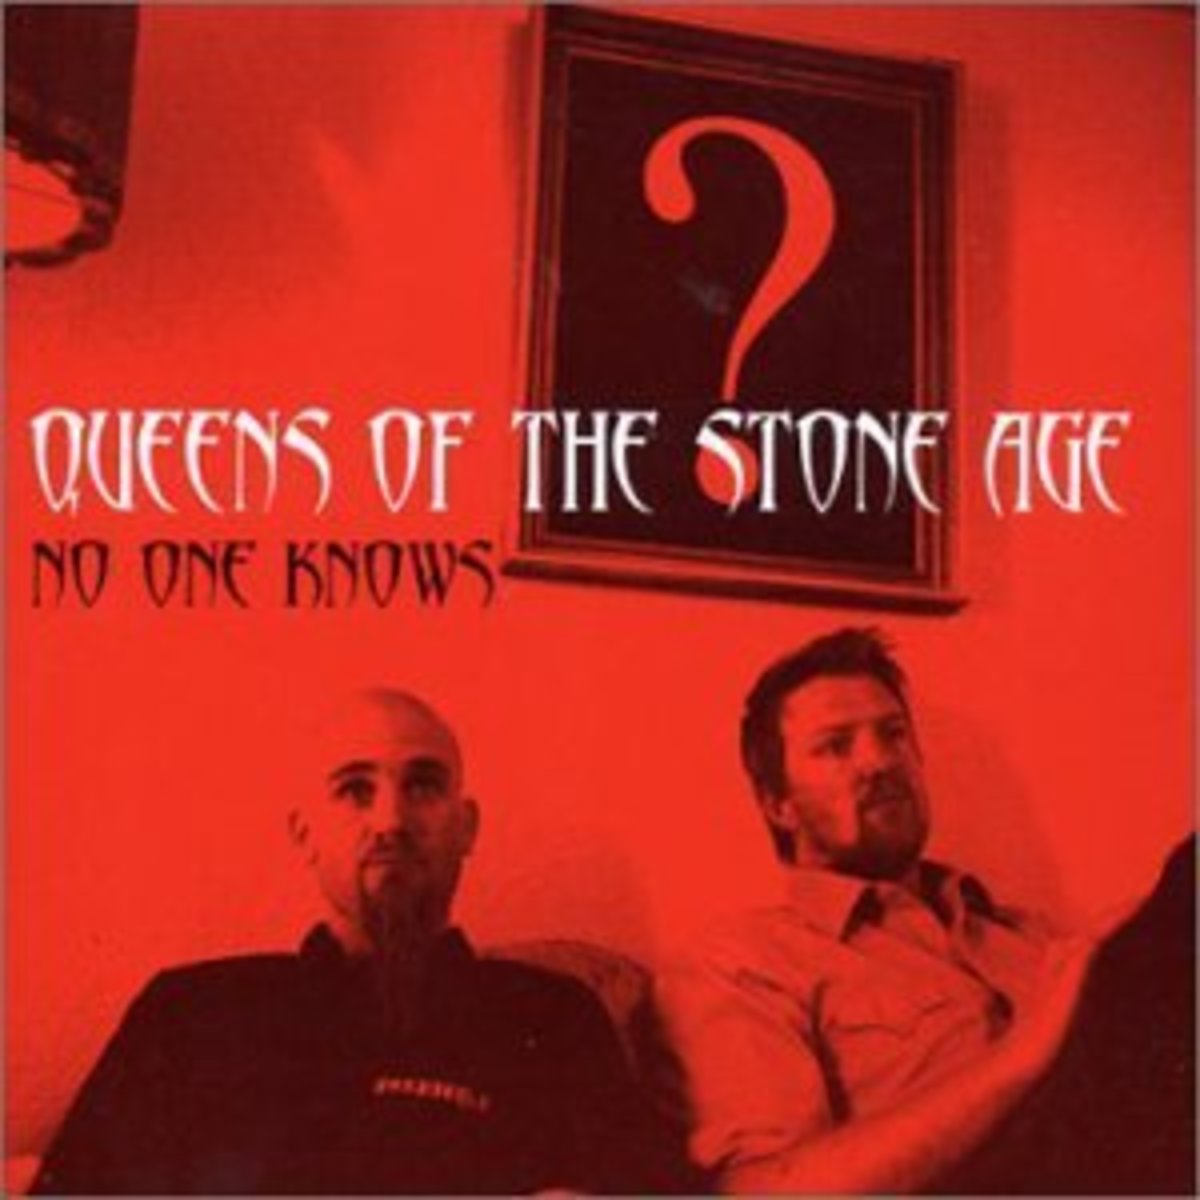 What do the Lyrics Mean? Symbolism & Meaning: Queens of the Stone Age - No One Knows Lyrics